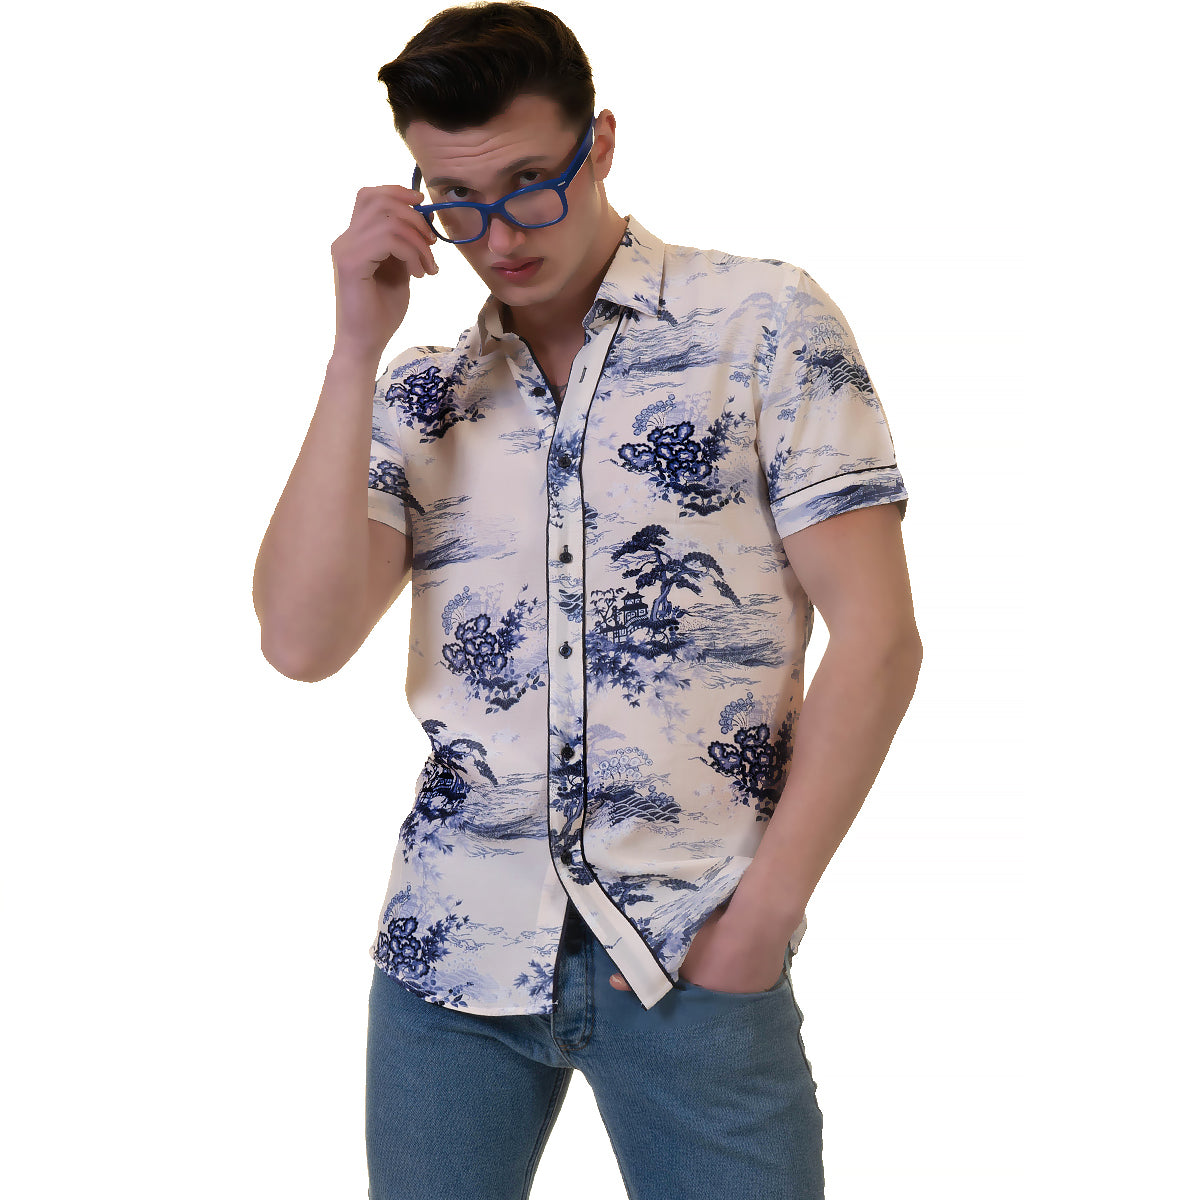 Floral Mens Short Sleeve Button up Shirts - Tailored Slim Fit Cotton Dress Shirts